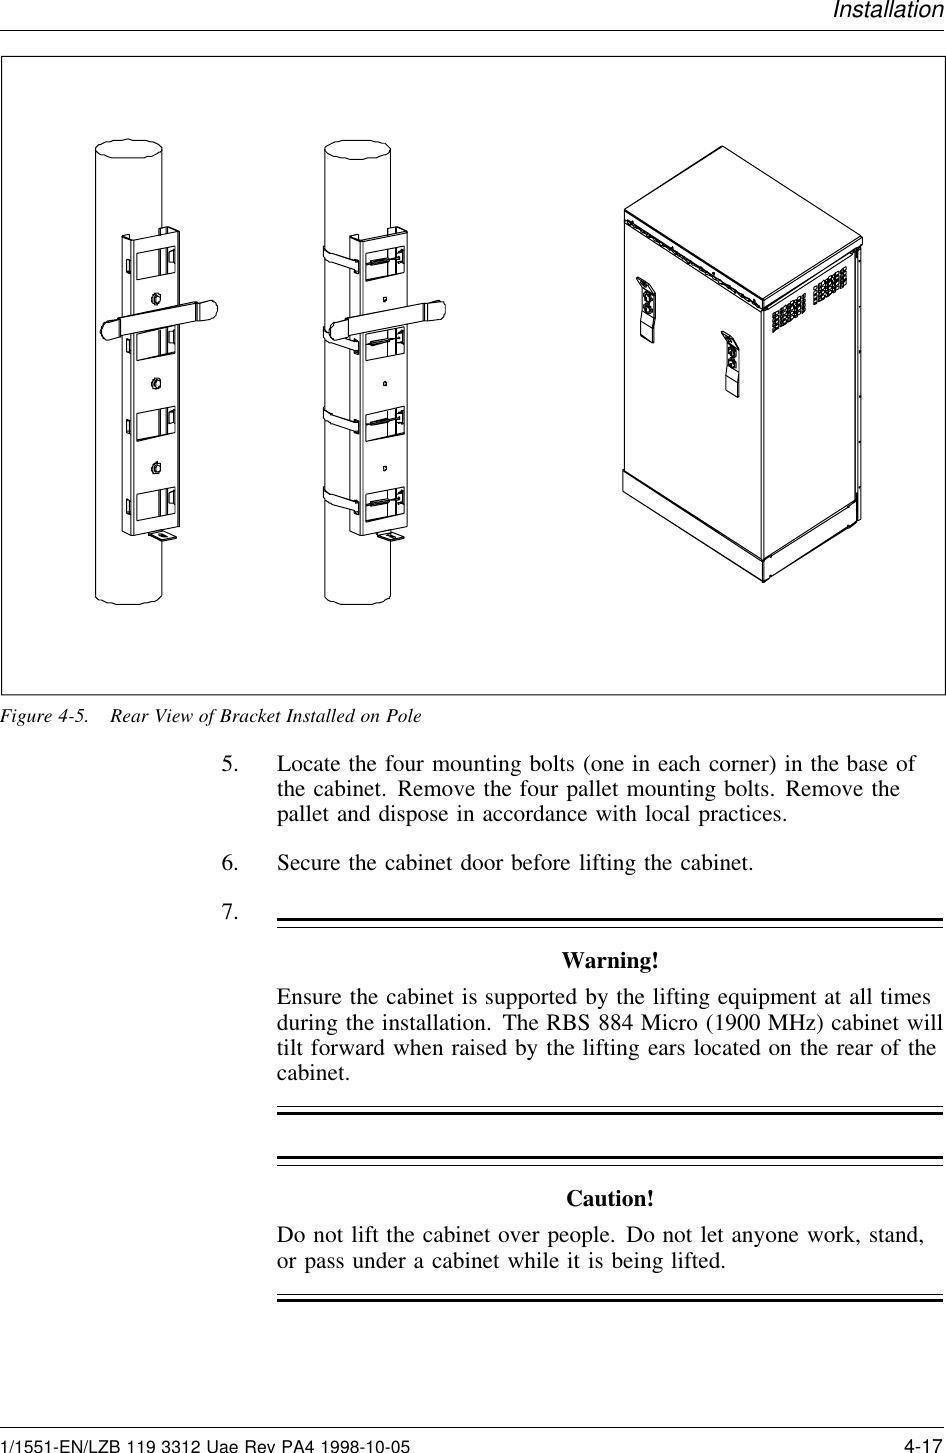 InstallationFigure 4-5. Rear View of Bracket Installed on Pole5. Locate the four mounting bolts (one in each corner) in the base ofthe cabinet. Remove the four pallet mounting bolts. Remove thepallet and dispose in accordance with local practices.6. Secure the cabinet door before lifting the cabinet.7.Warning!Ensure the cabinet is supported by the lifting equipment at all timesduring the installation. The RBS 884 Micro (1900 MHz) cabinet willtilt forward when raised by the lifting ears located on the rear of thecabinet.Caution!Do not lift the cabinet over people. Do not let anyone work, stand,or pass under a cabinet while it is being lifted.1/1551-EN/LZB 119 3312 Uae Rev PA4 1998-10-05 4-17